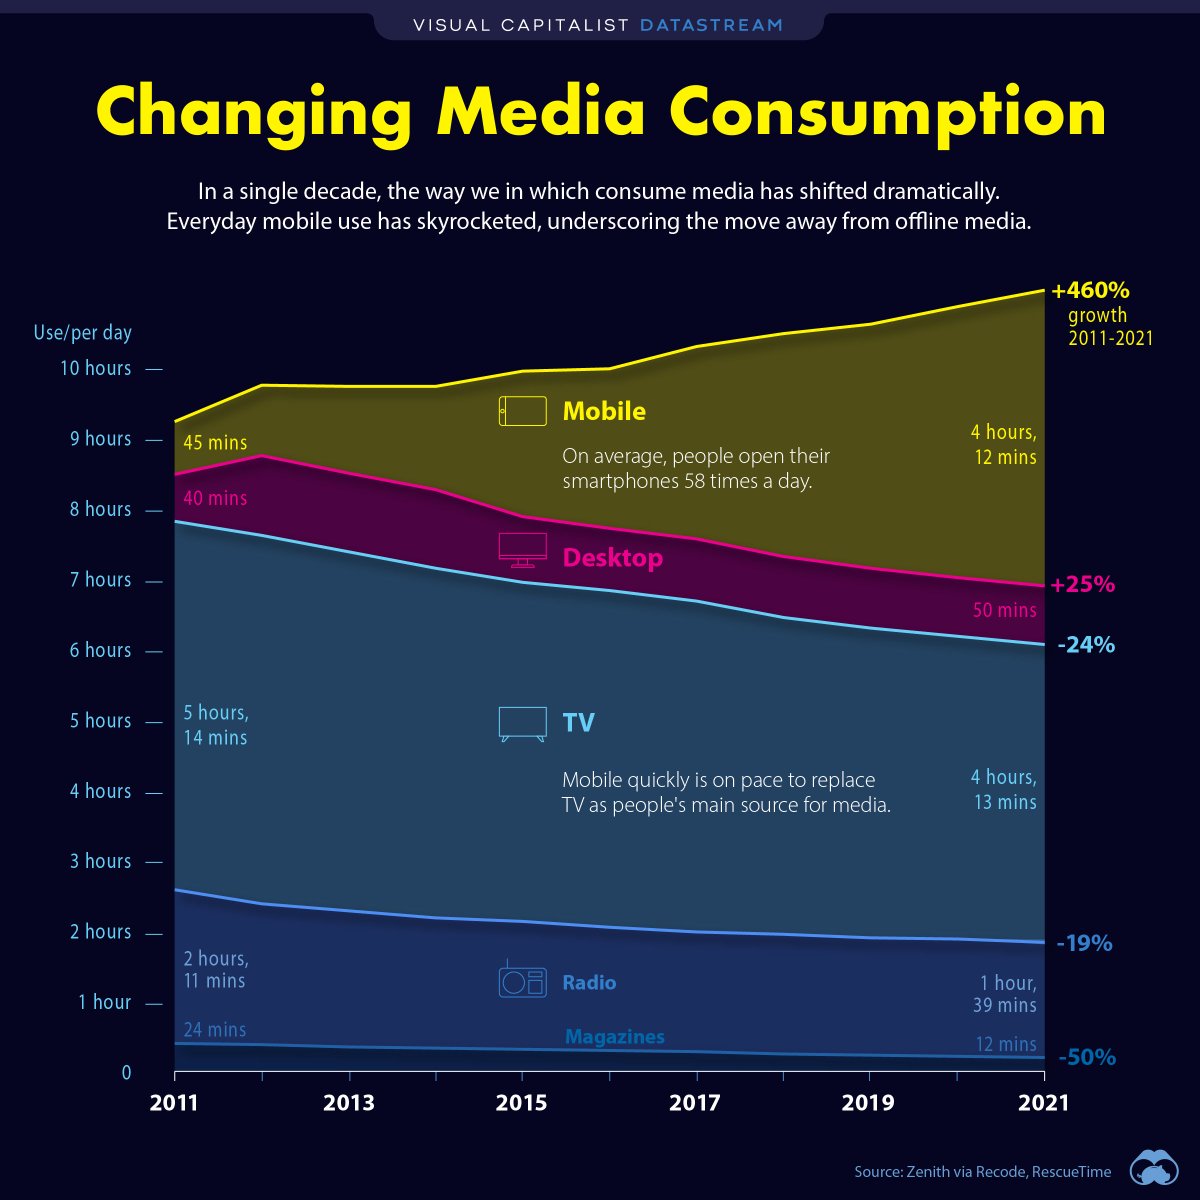 How Media Consumption Has Changed Over the Last Decade (2011-2021) visualcapitalist.com/how-media-cons… #DigitalMarketing #MediaConsumption via @VisualCap